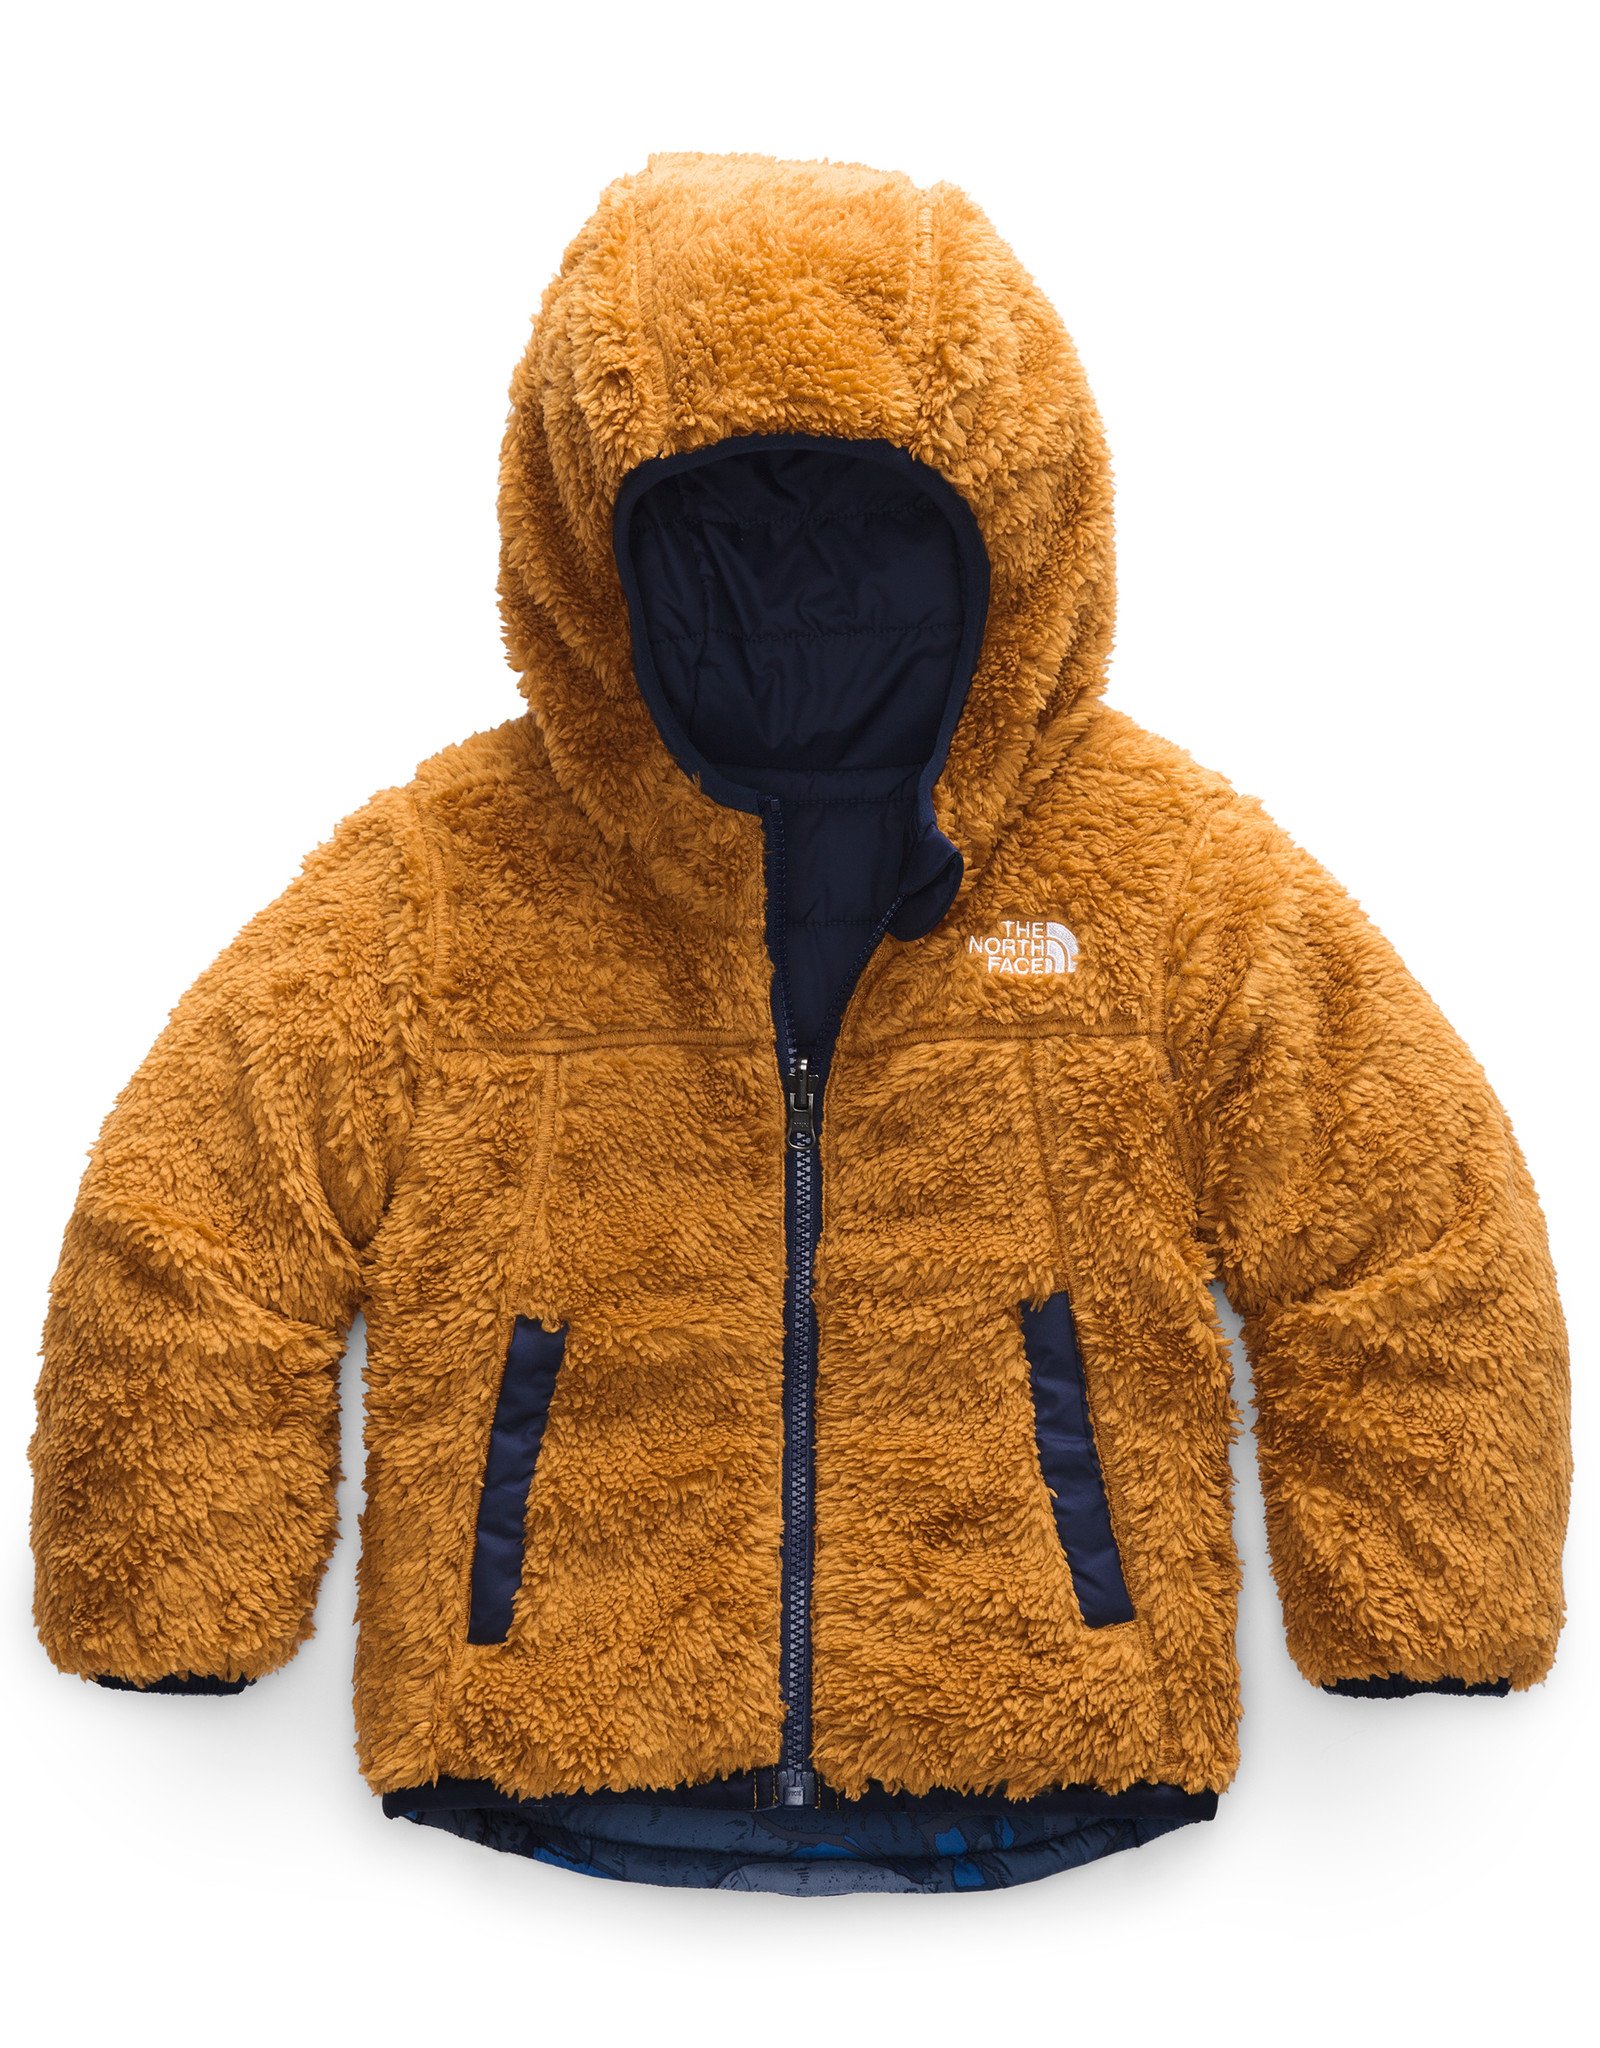 The North Face Toddler Boy's Reversible 